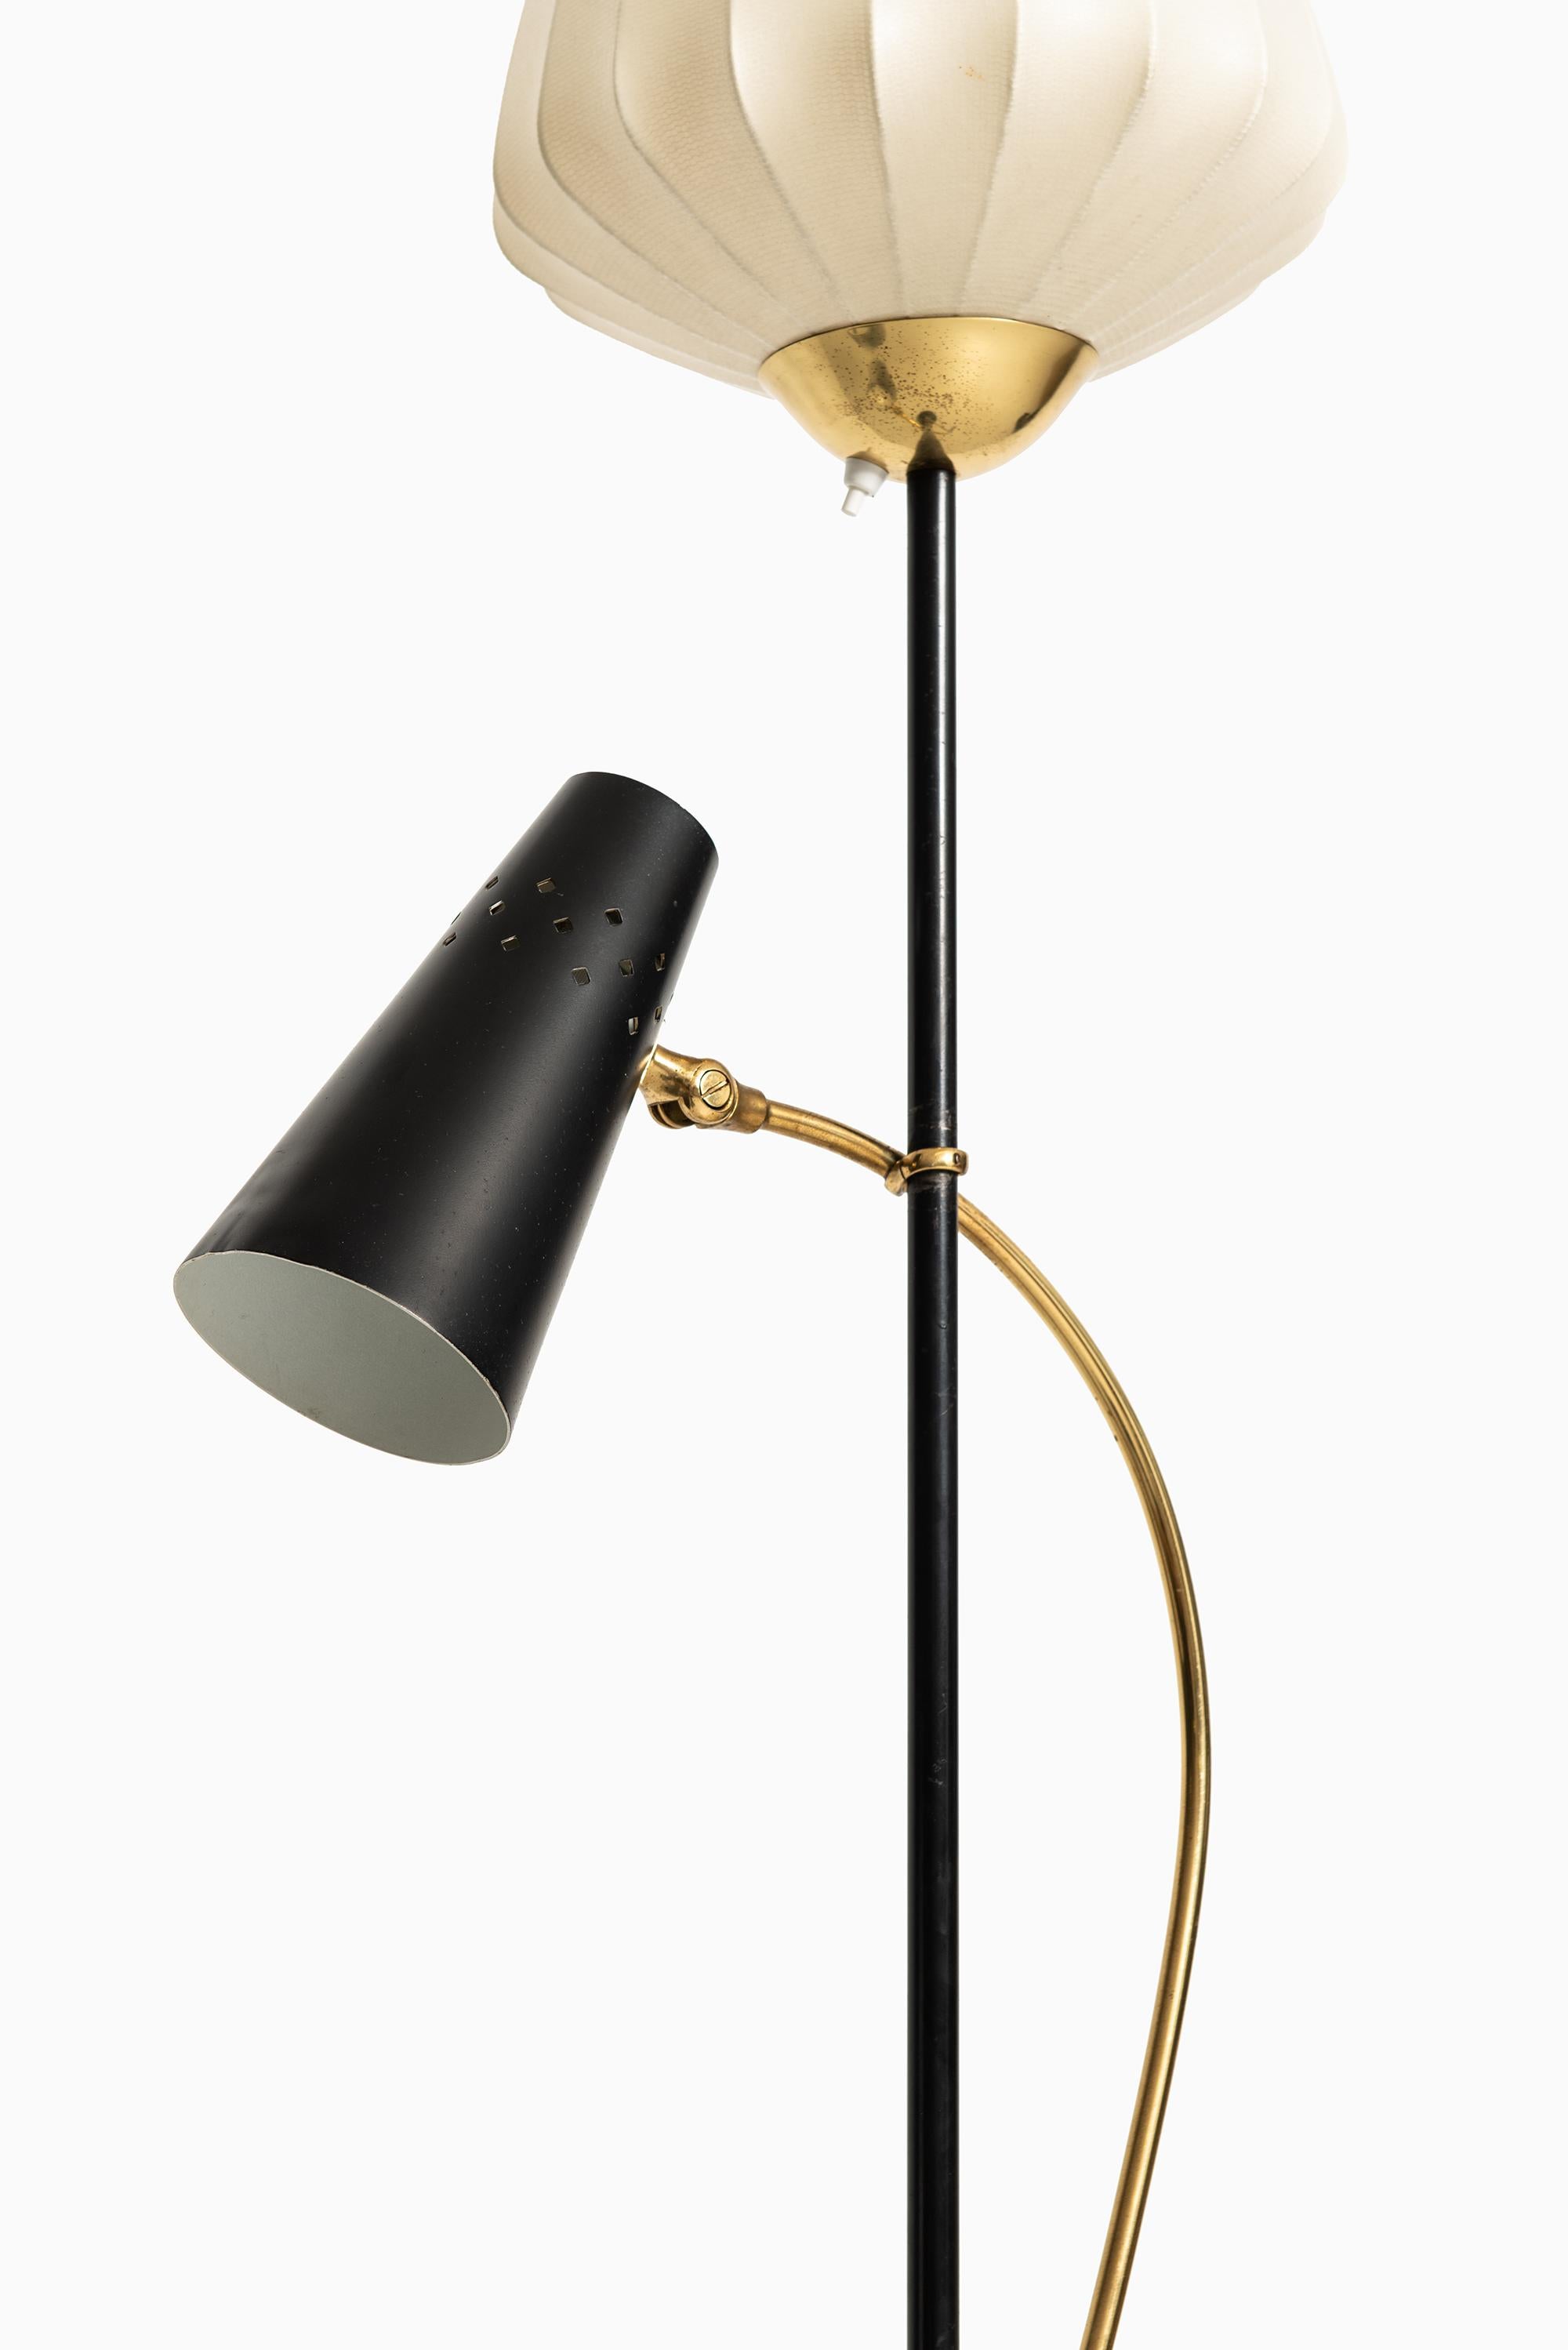 Rare floor lamp by unknown designer. Produced by Boréns in Sweden.